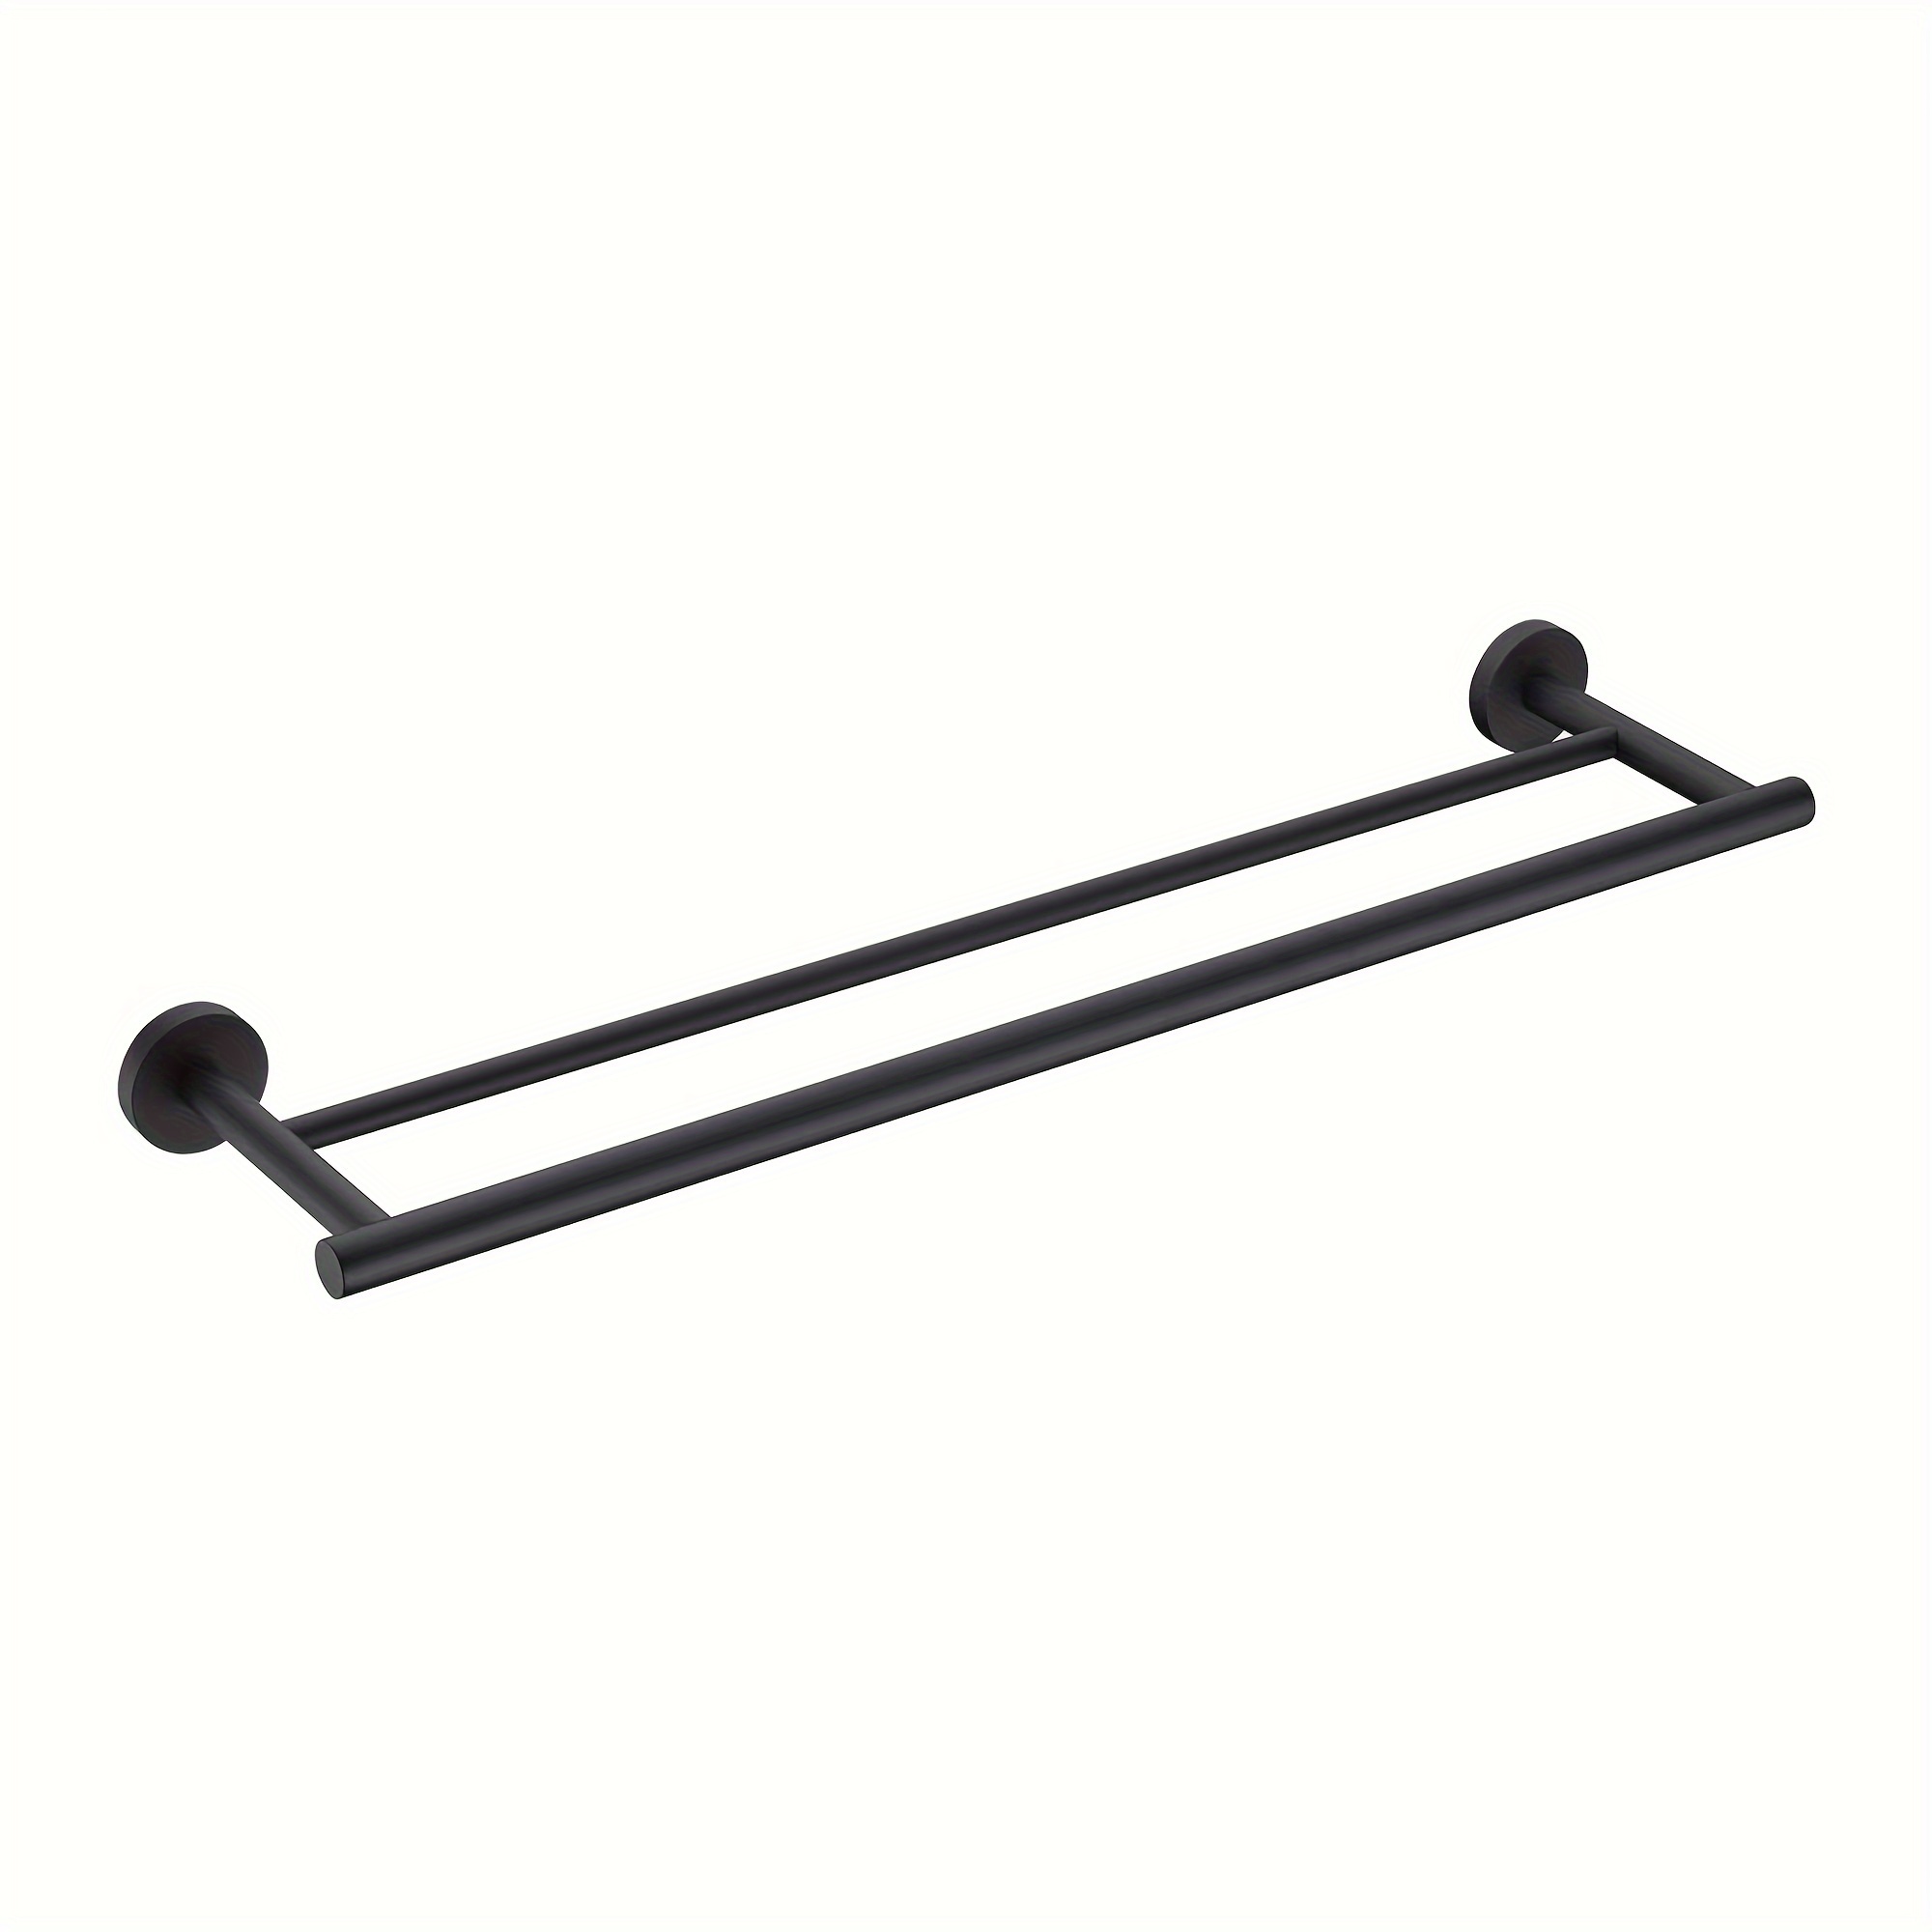 

1pc Stylish Matte Black Bath Towel Bar - Wall Mounted Stainless Steel Towel Holder For Bathroom Accessories And Household Items